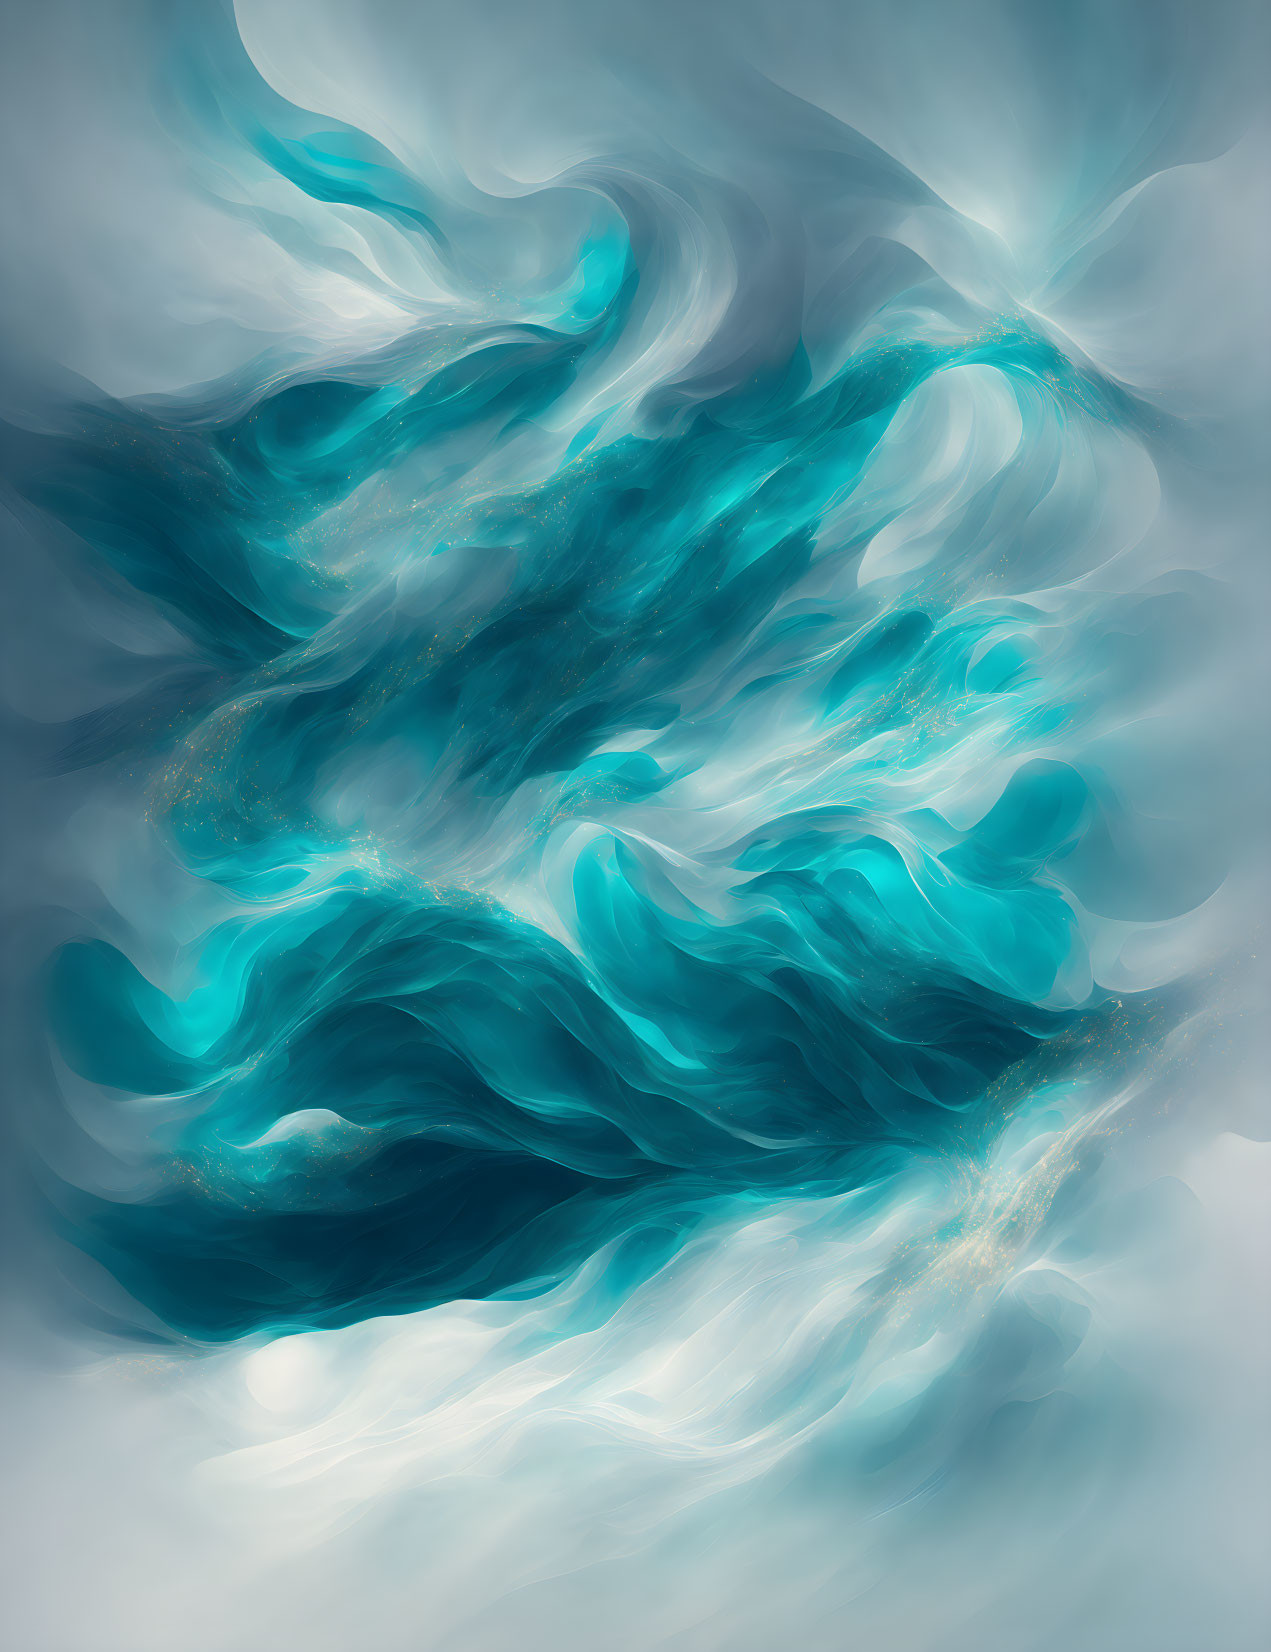 Abstract Turquoise and White Swirling Pattern Depicting Ethereal Ocean or Celestial Event